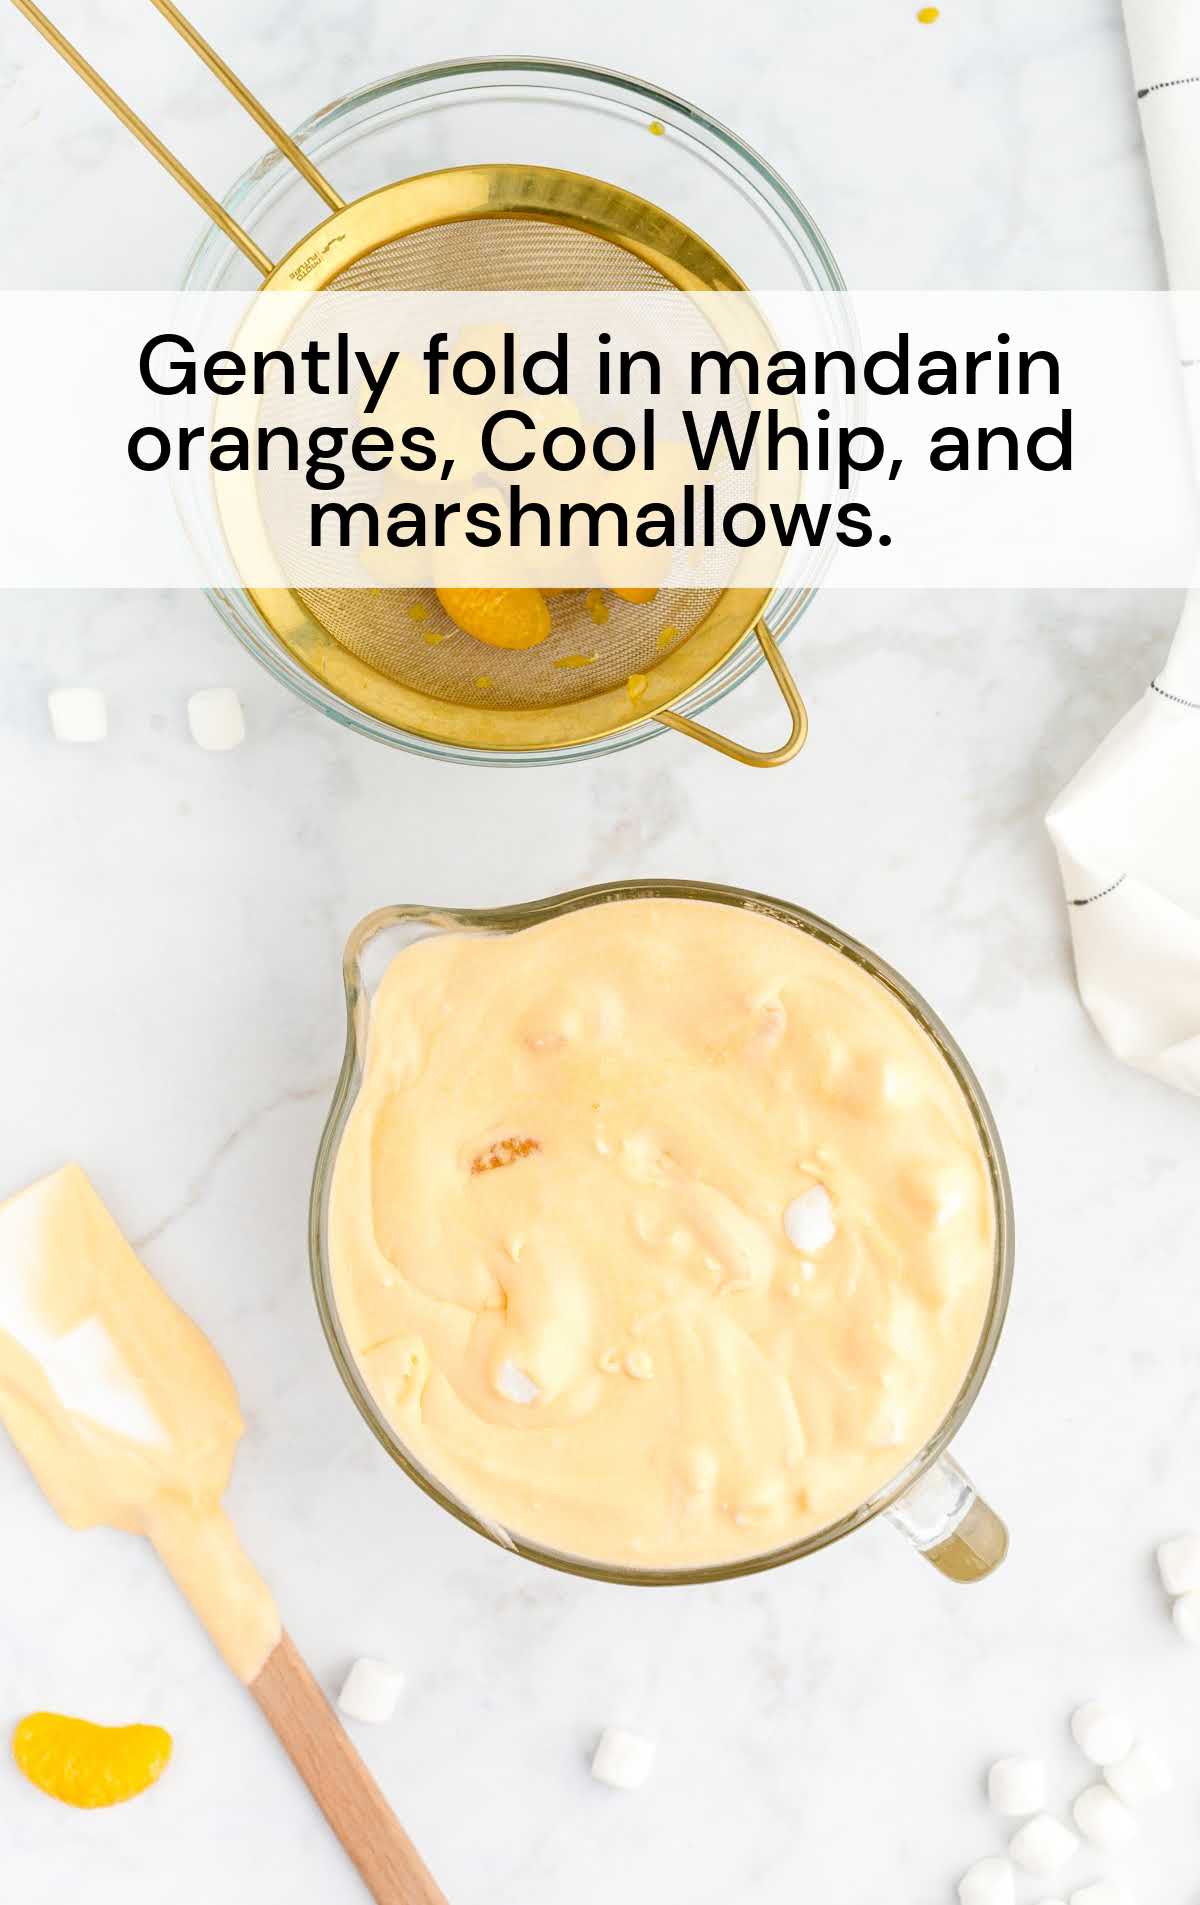 mandarin oranges, cool whip, and marshmallows folded in a cup